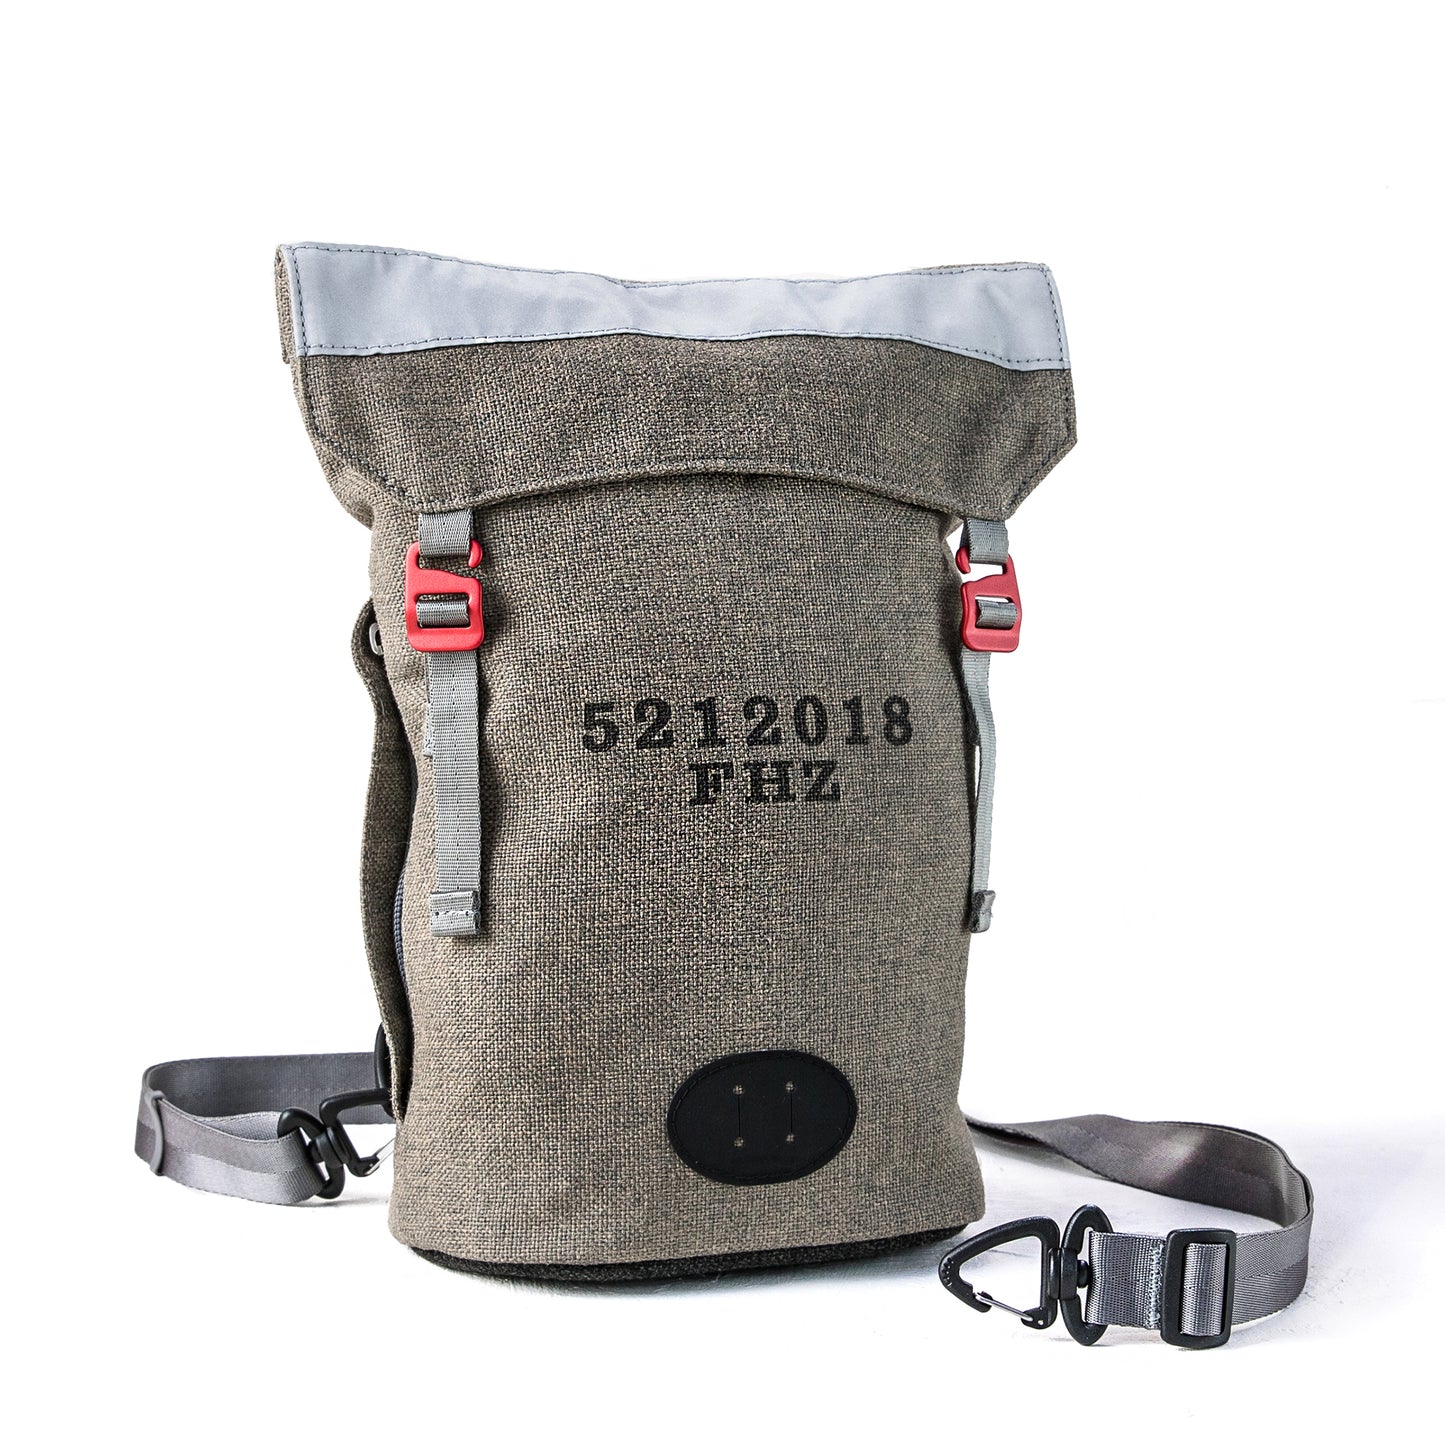 Front view of convertible Fierce Hazel backpack made with sustainable fabric. Functional, rugged and water-resistant it is military styled but beautiful